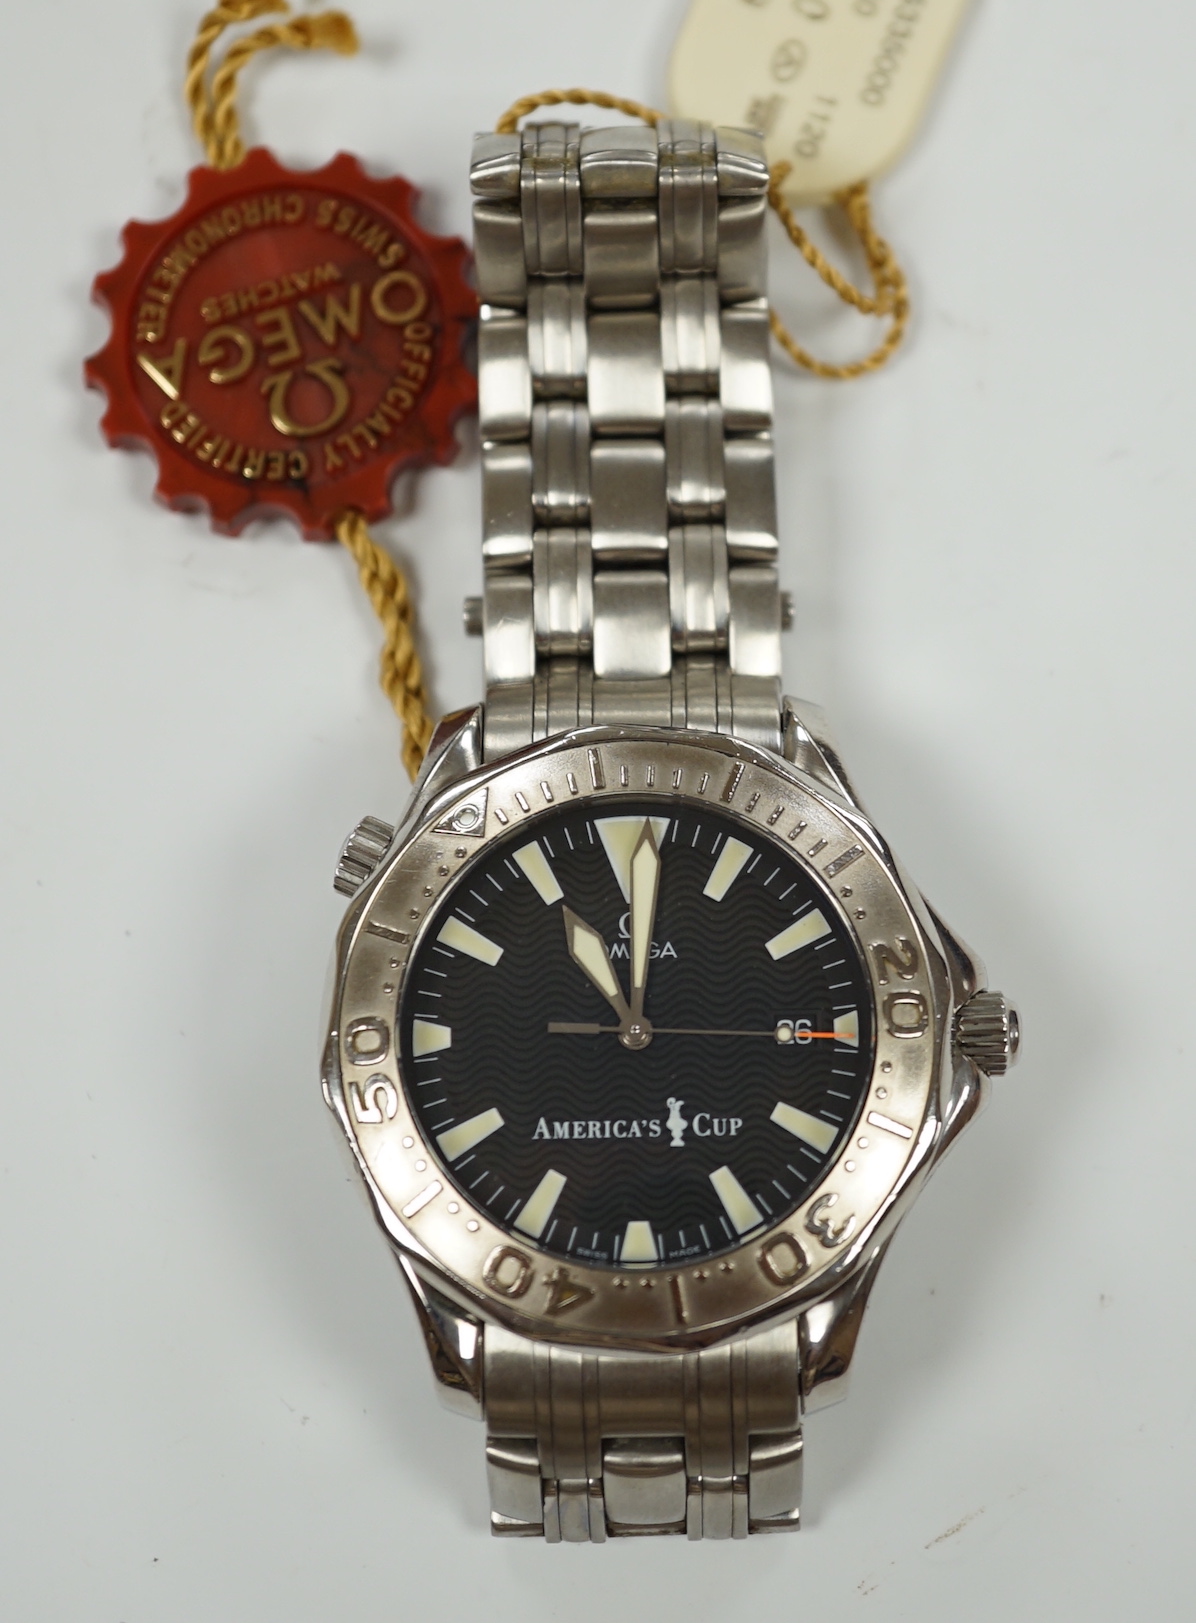 A gentleman's 2000 stainless steel Omega Seamaster Professional America's Cup wrist watch, with box and papers.